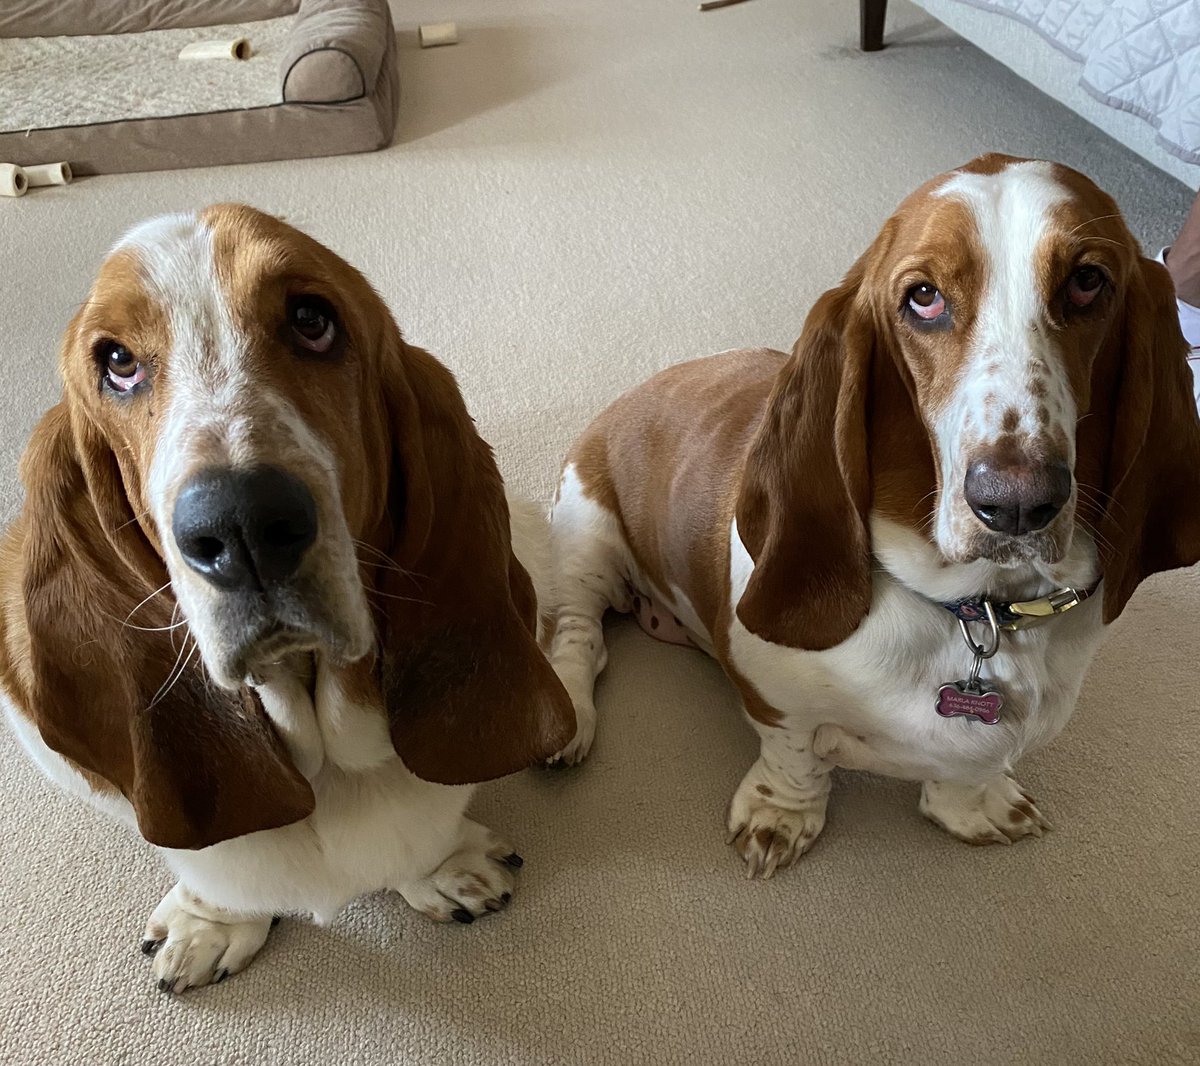 Winston and Penny giving their best cheese begging faces...🐶🧀❤️ #bassetlife #bassetlove